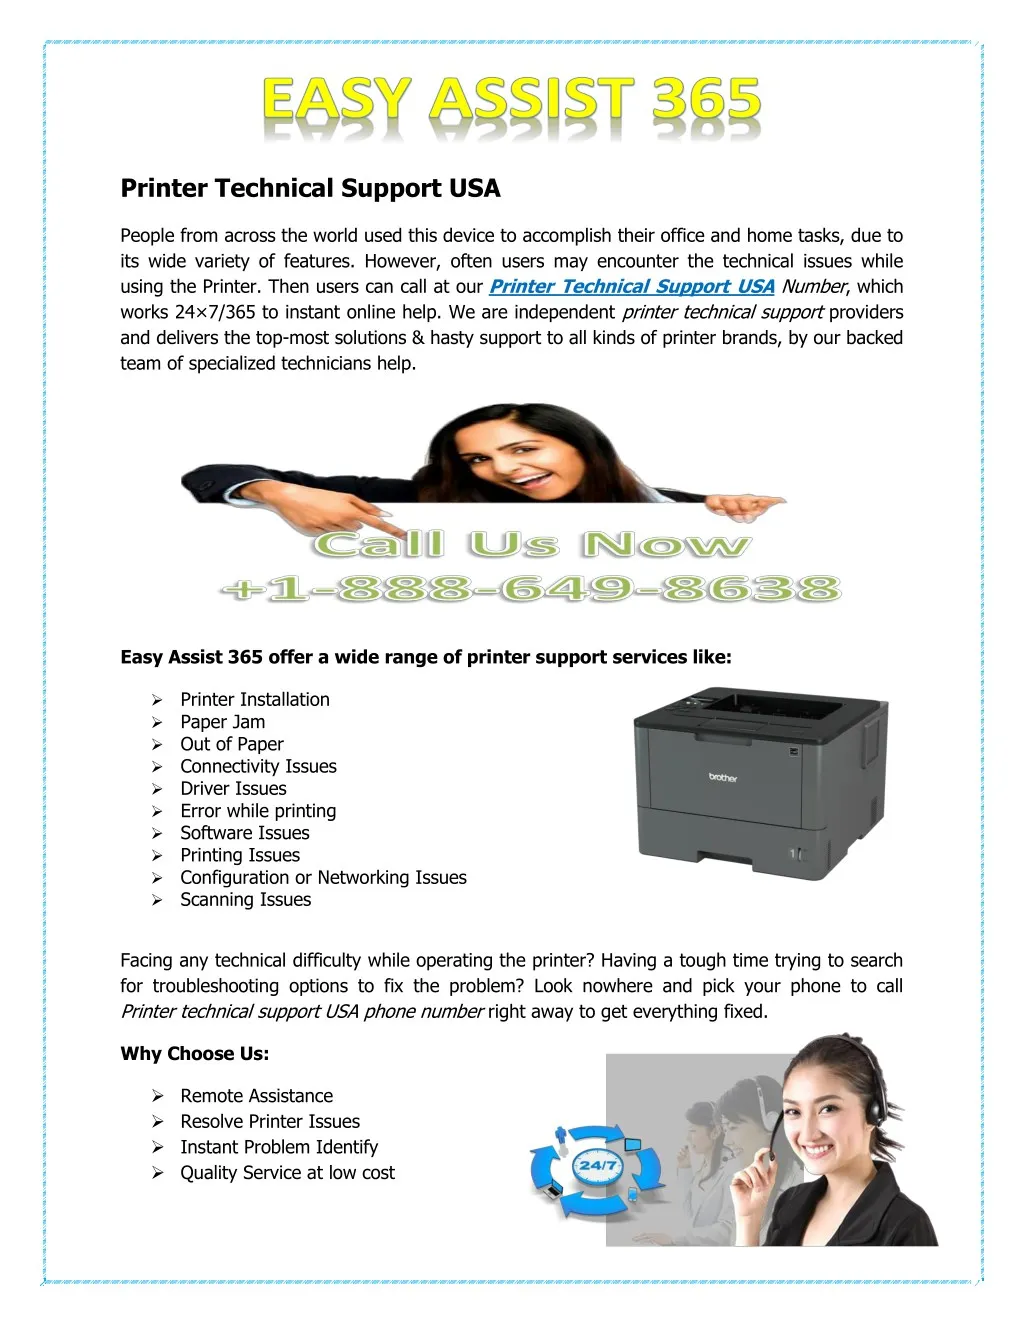 printer technical support usa